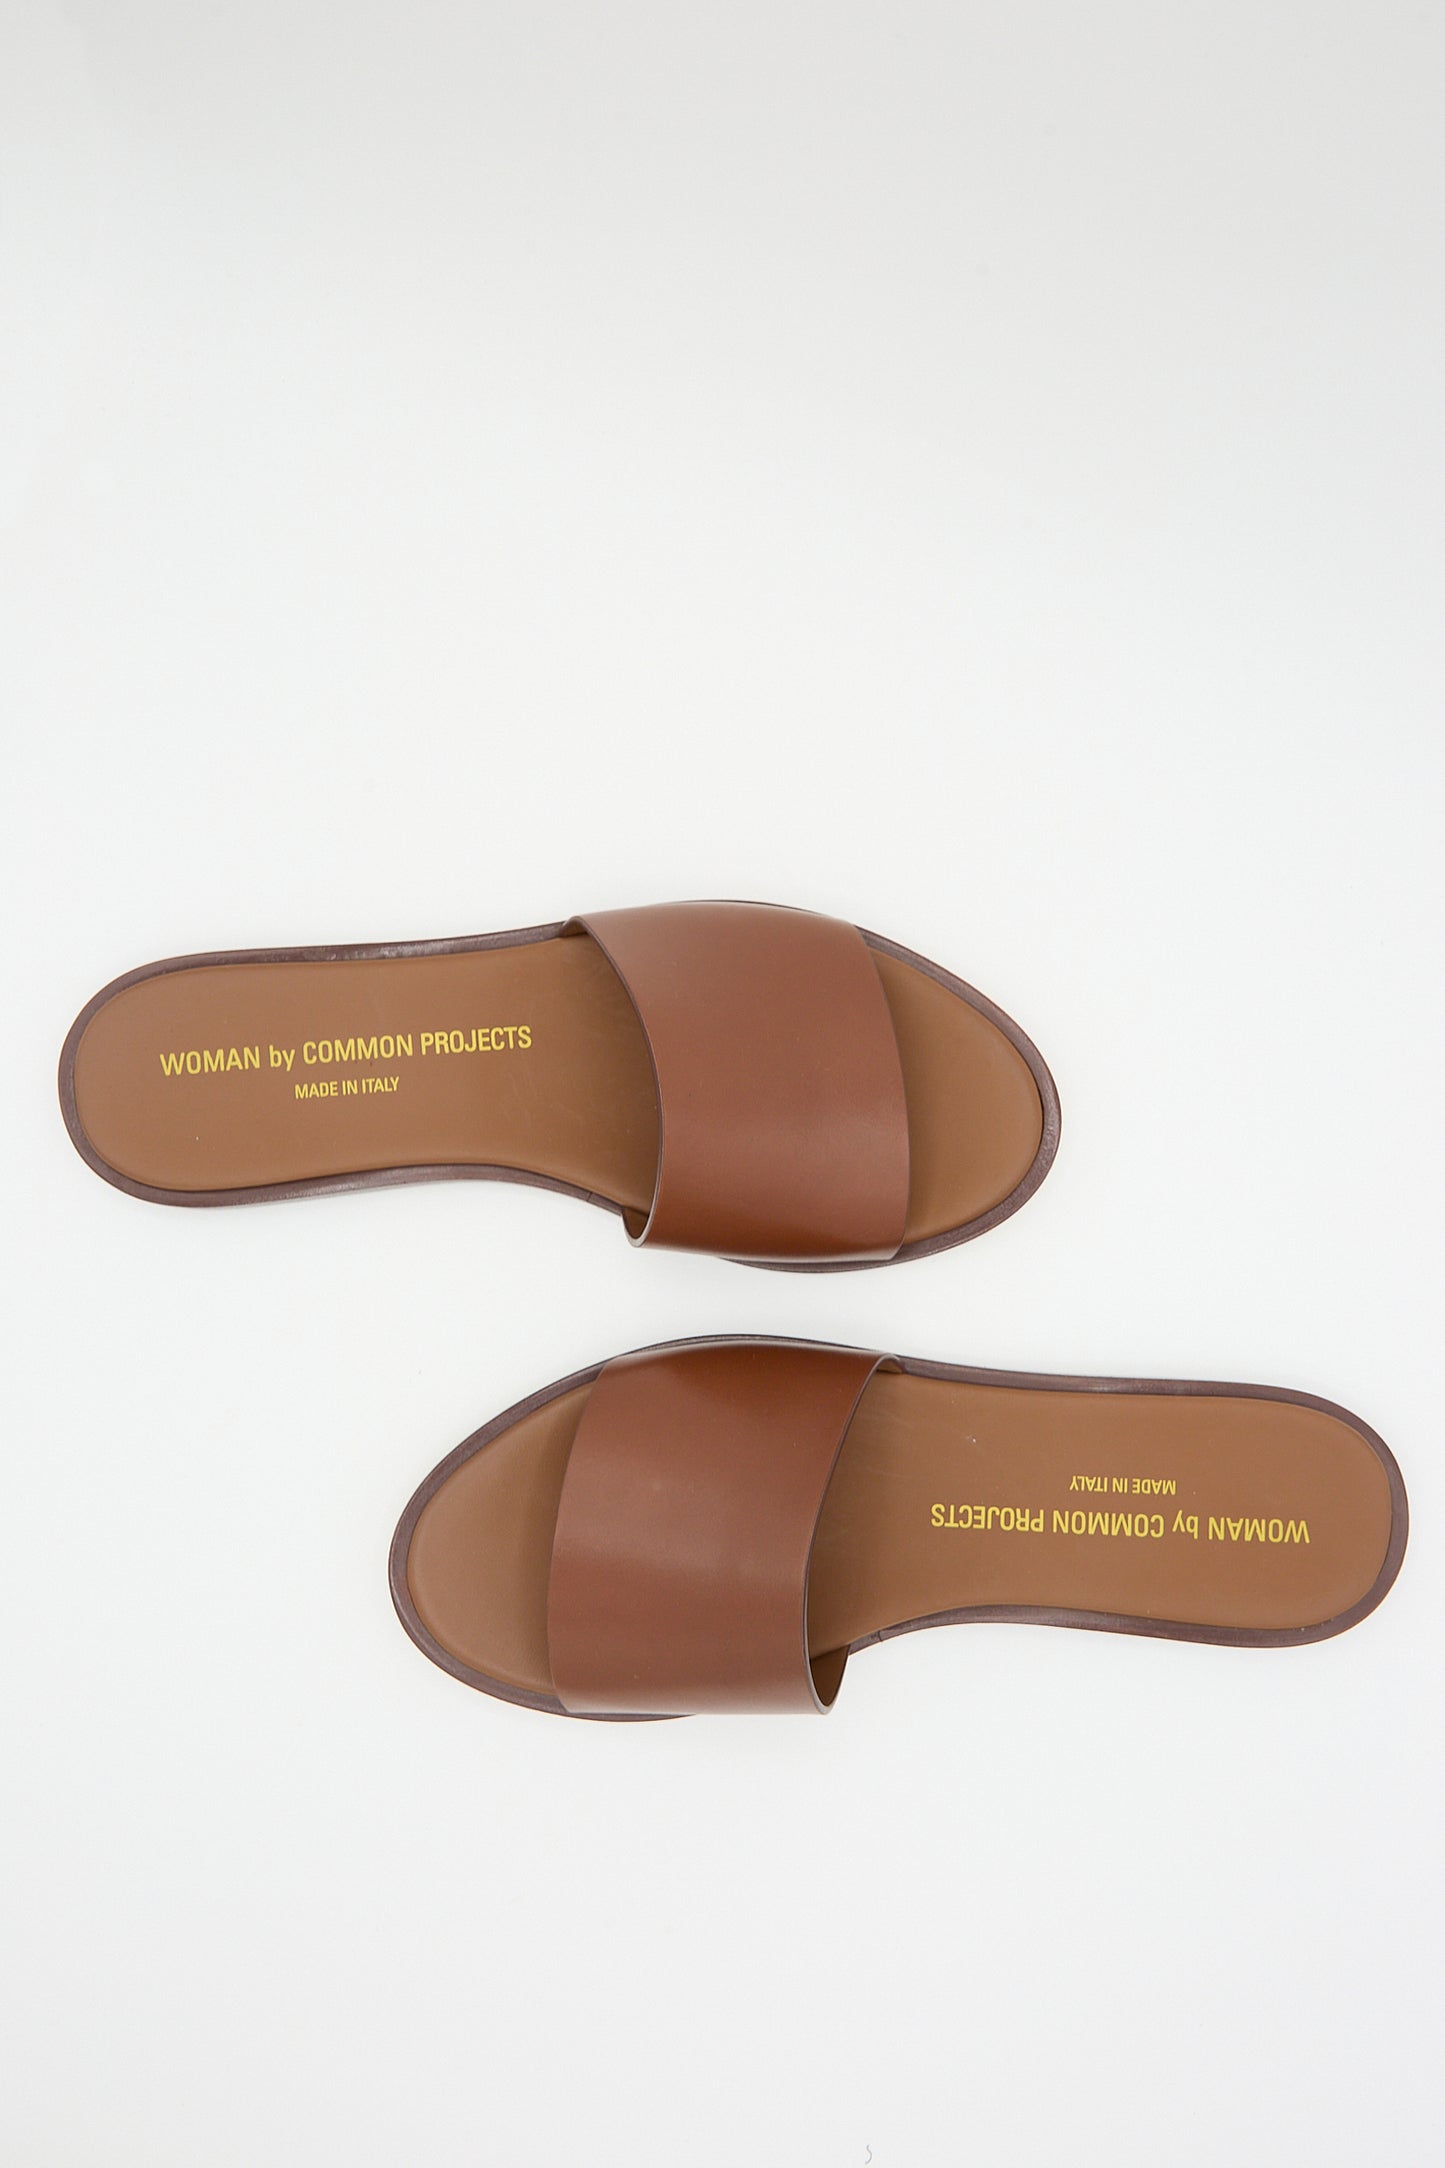 Brown Nappa leather slide sandals displayed against a white background.
becomes
Common Projects Leather Slide 6155 Sandal in Brown displayed against a white background.